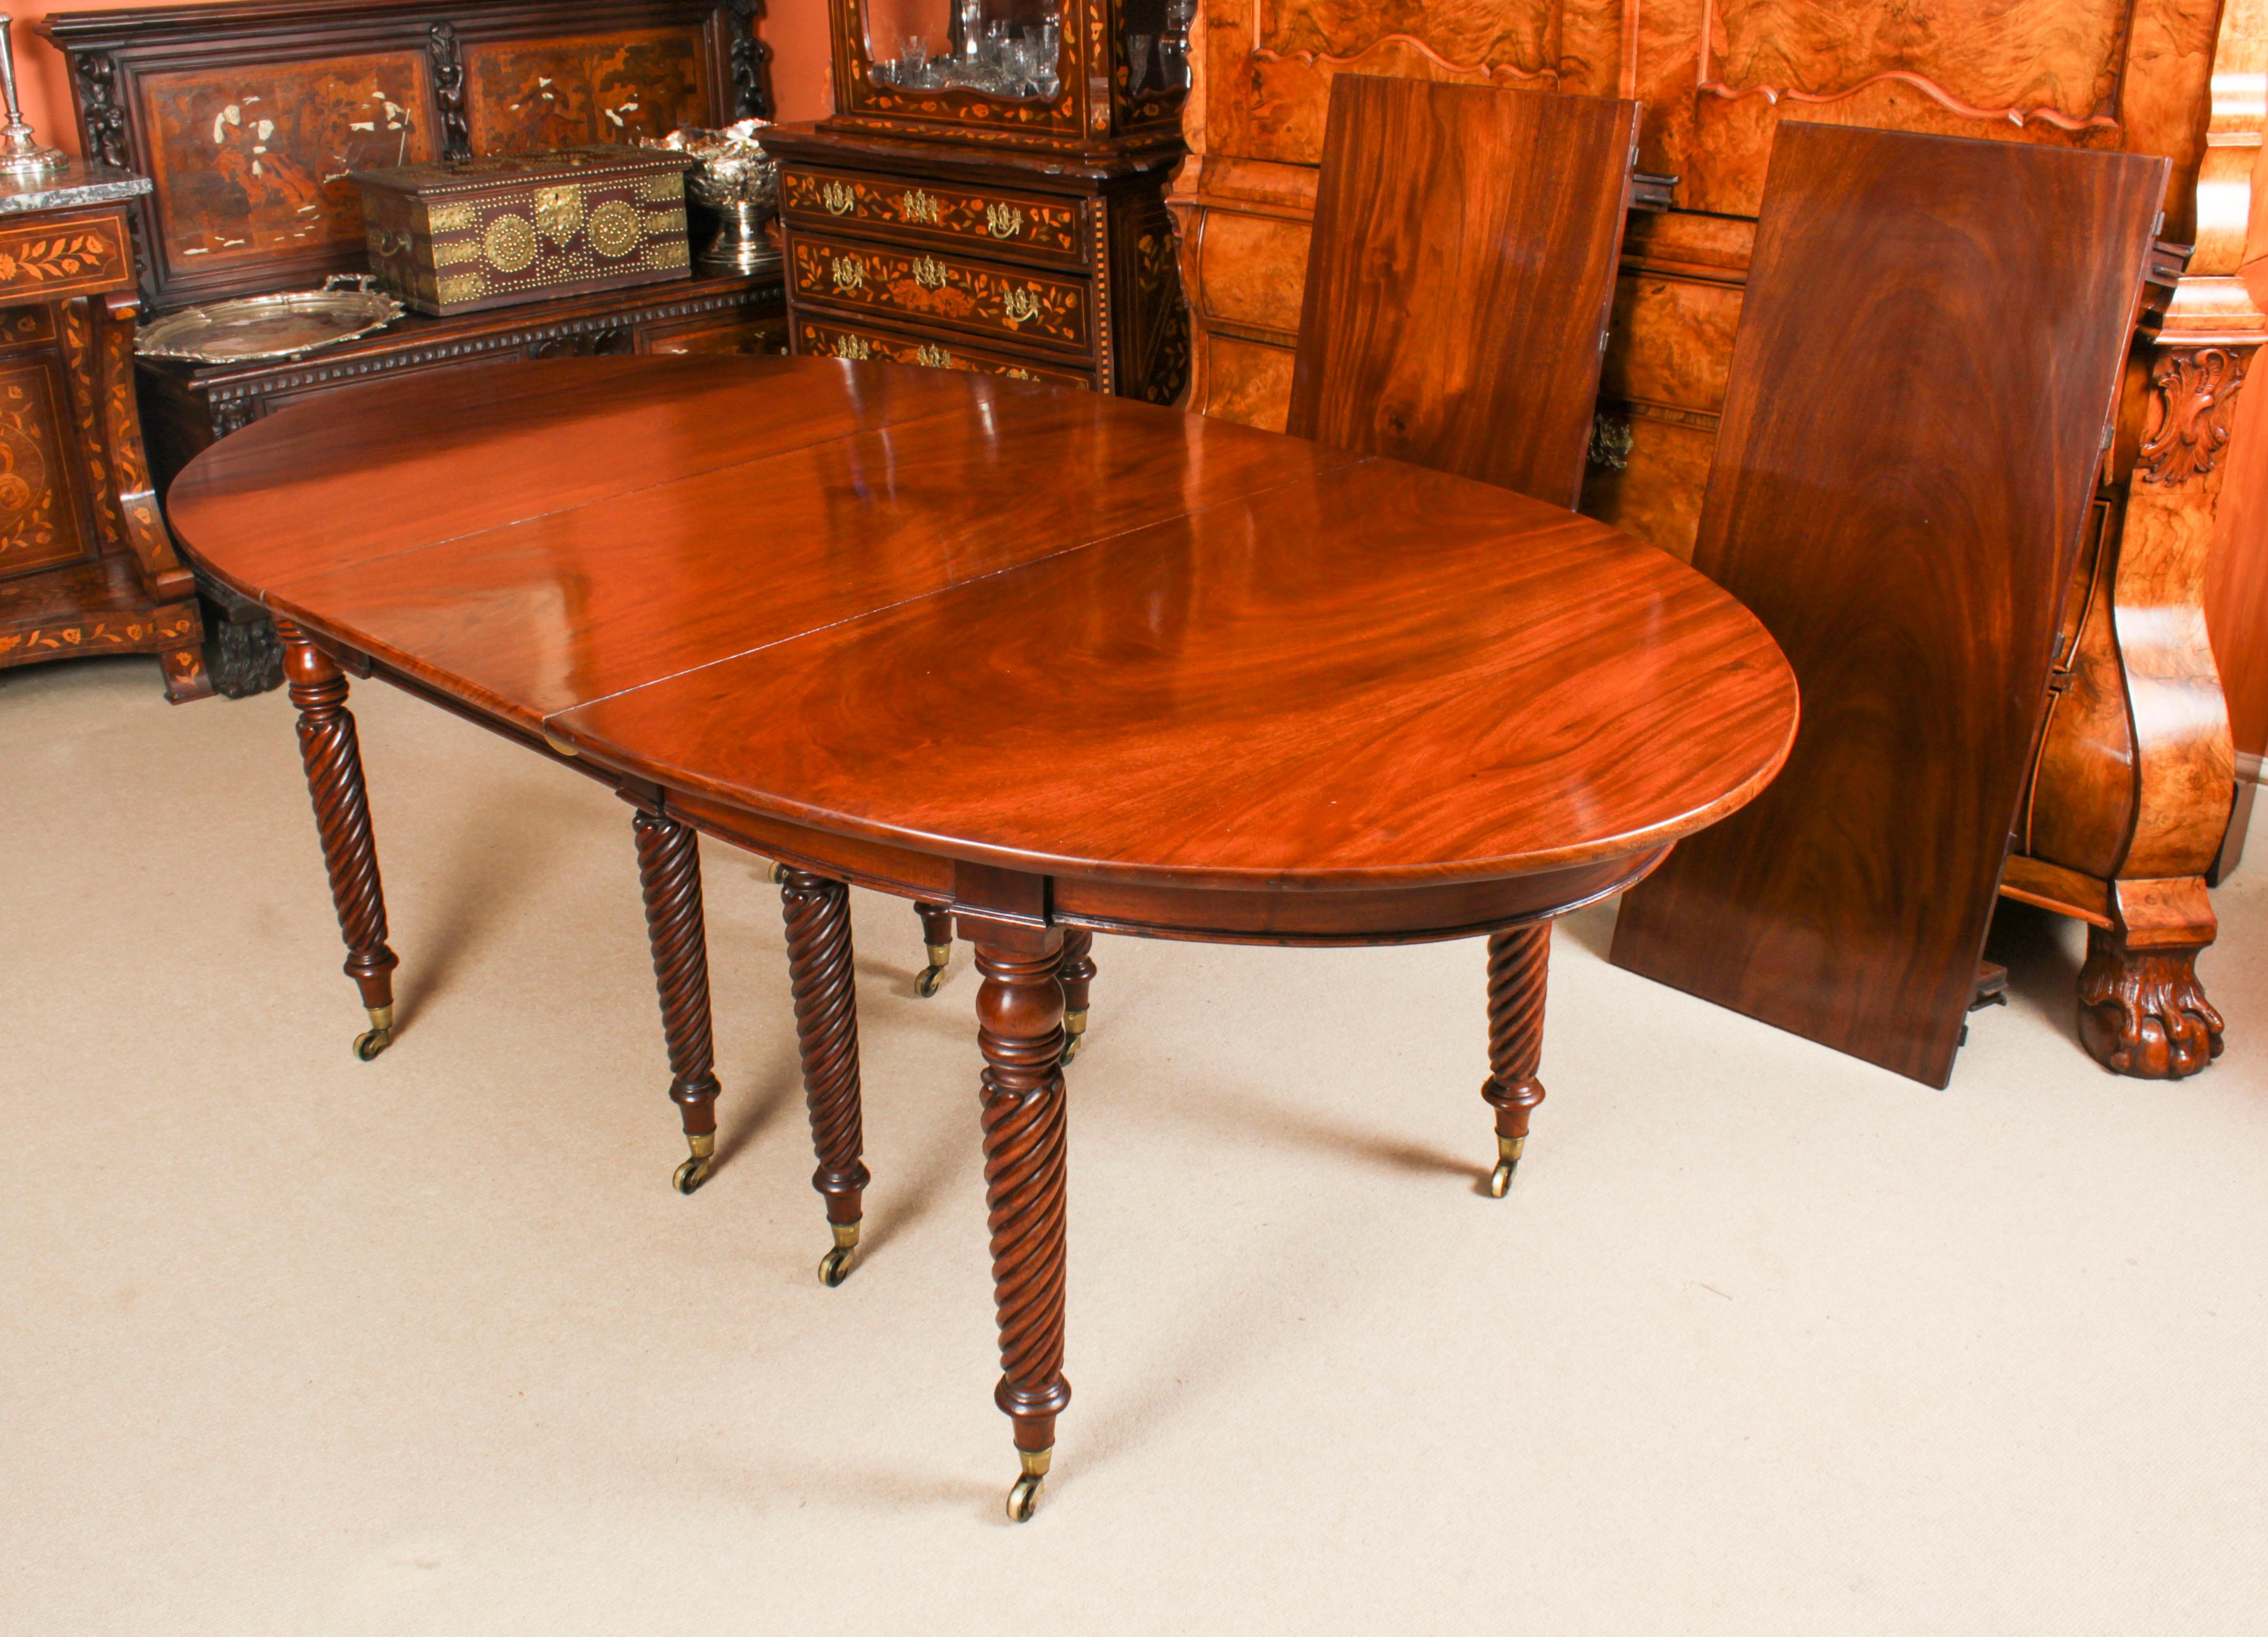 Mahogany Antique Regency Concertina Action Dining Table 19th C & 10 chairs For Sale